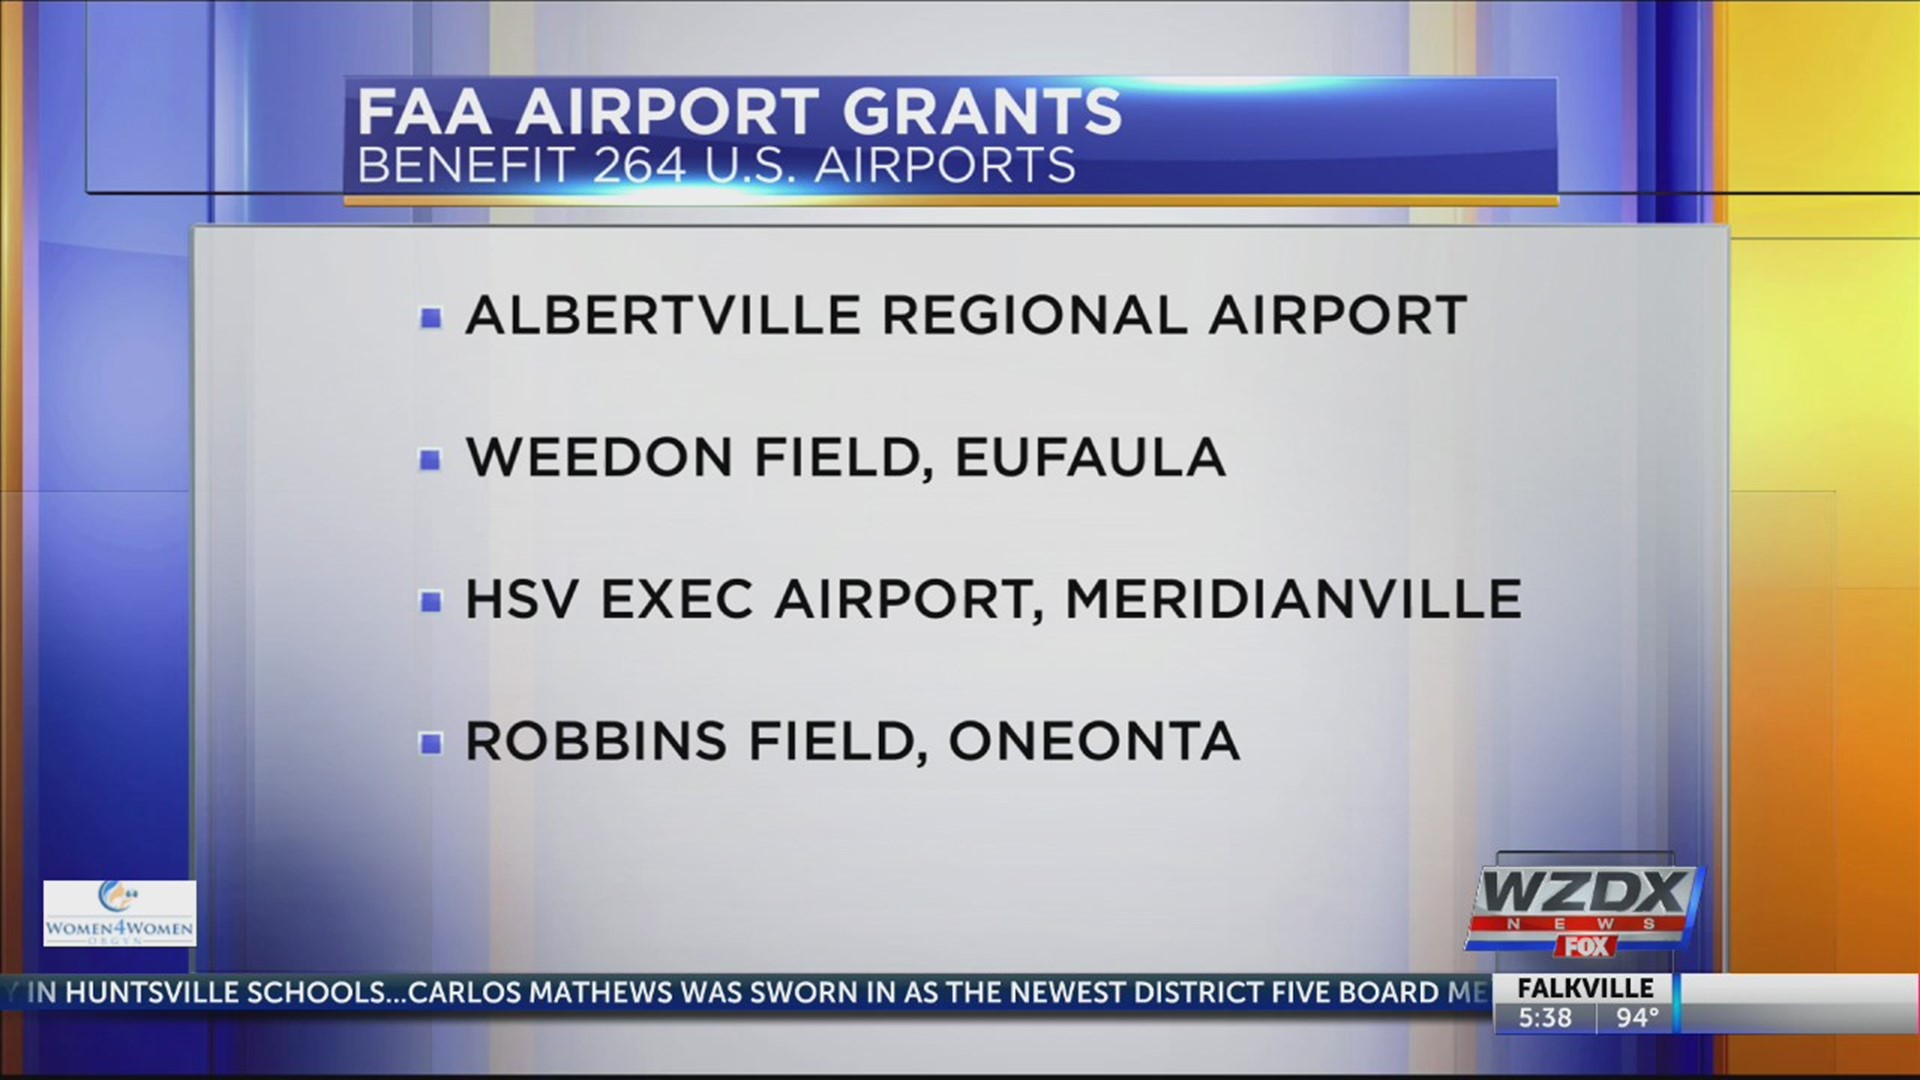 The FAA is awarding nearly a half billion dollars in airport infrastructure grants and four airports in Alabama are getting some of those grants.